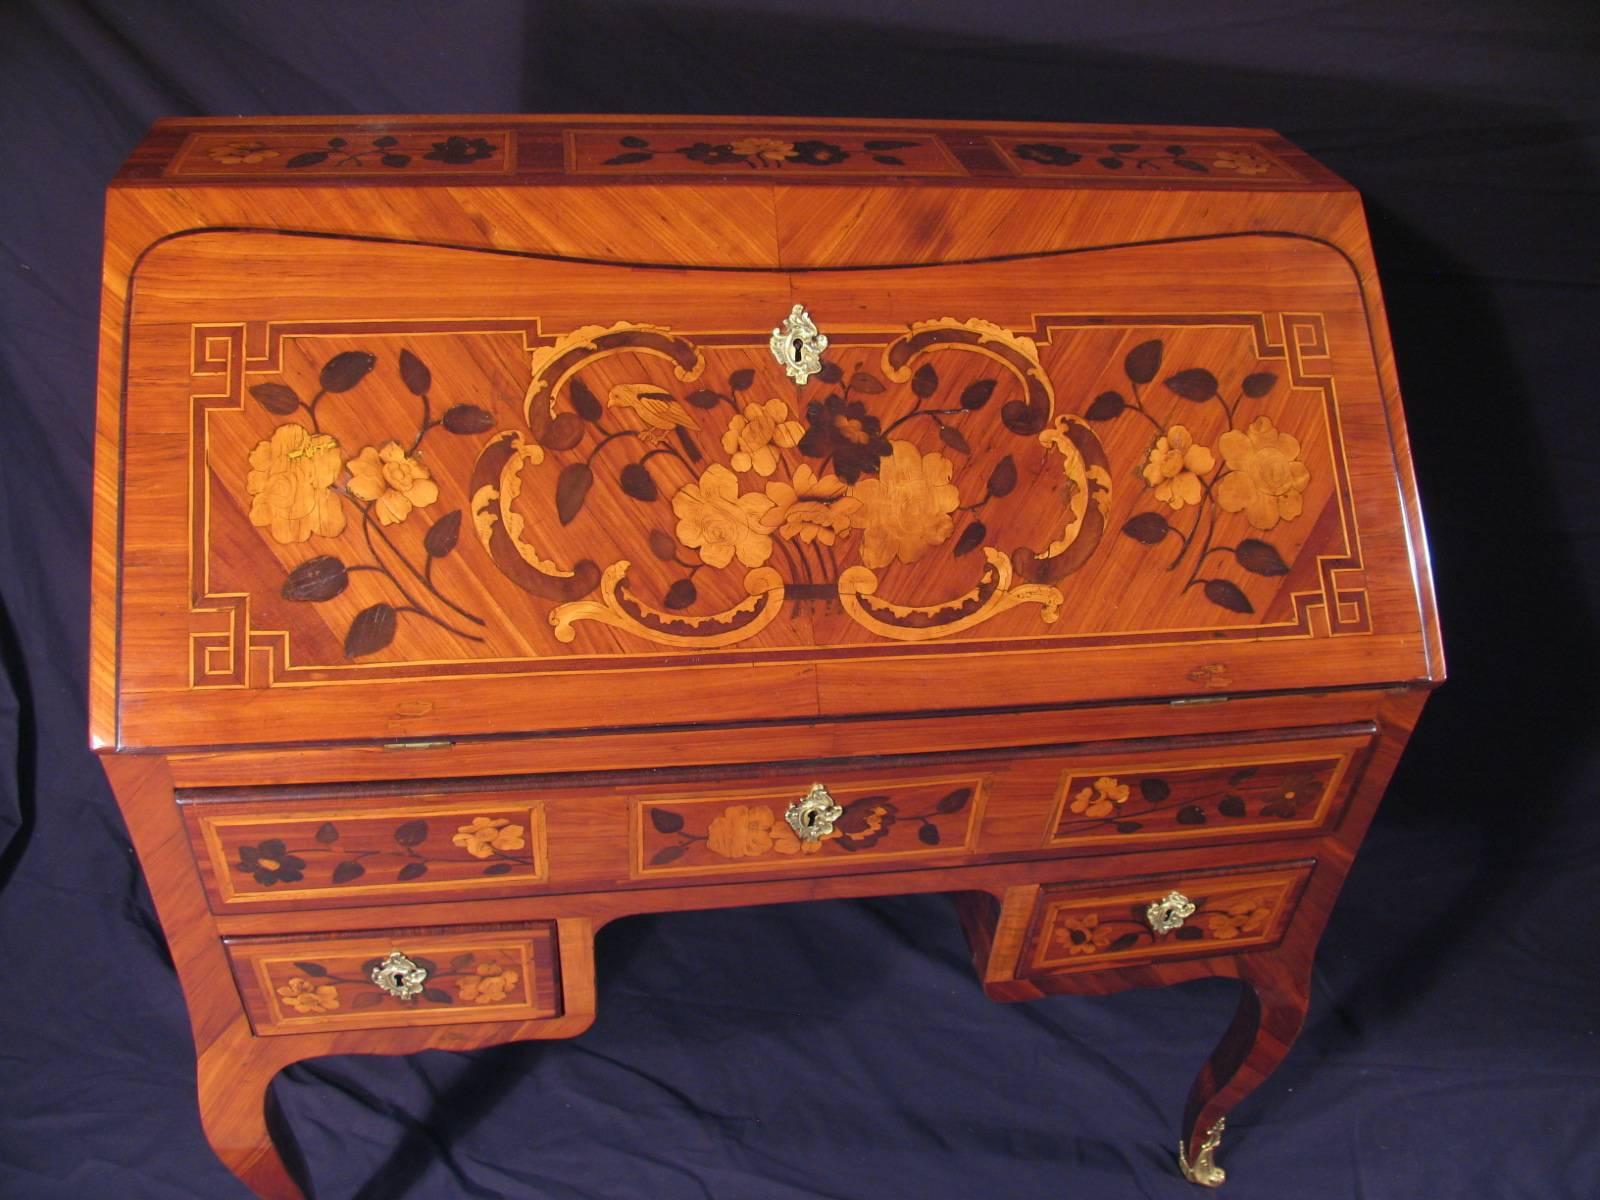 Exceptional fall top secretary with beautiful flower and bird marquetry. The inside with four drawers and two open compartments. Sides and front show matching marquetry patterns. In good refinished condition. The secretary will be shipped from